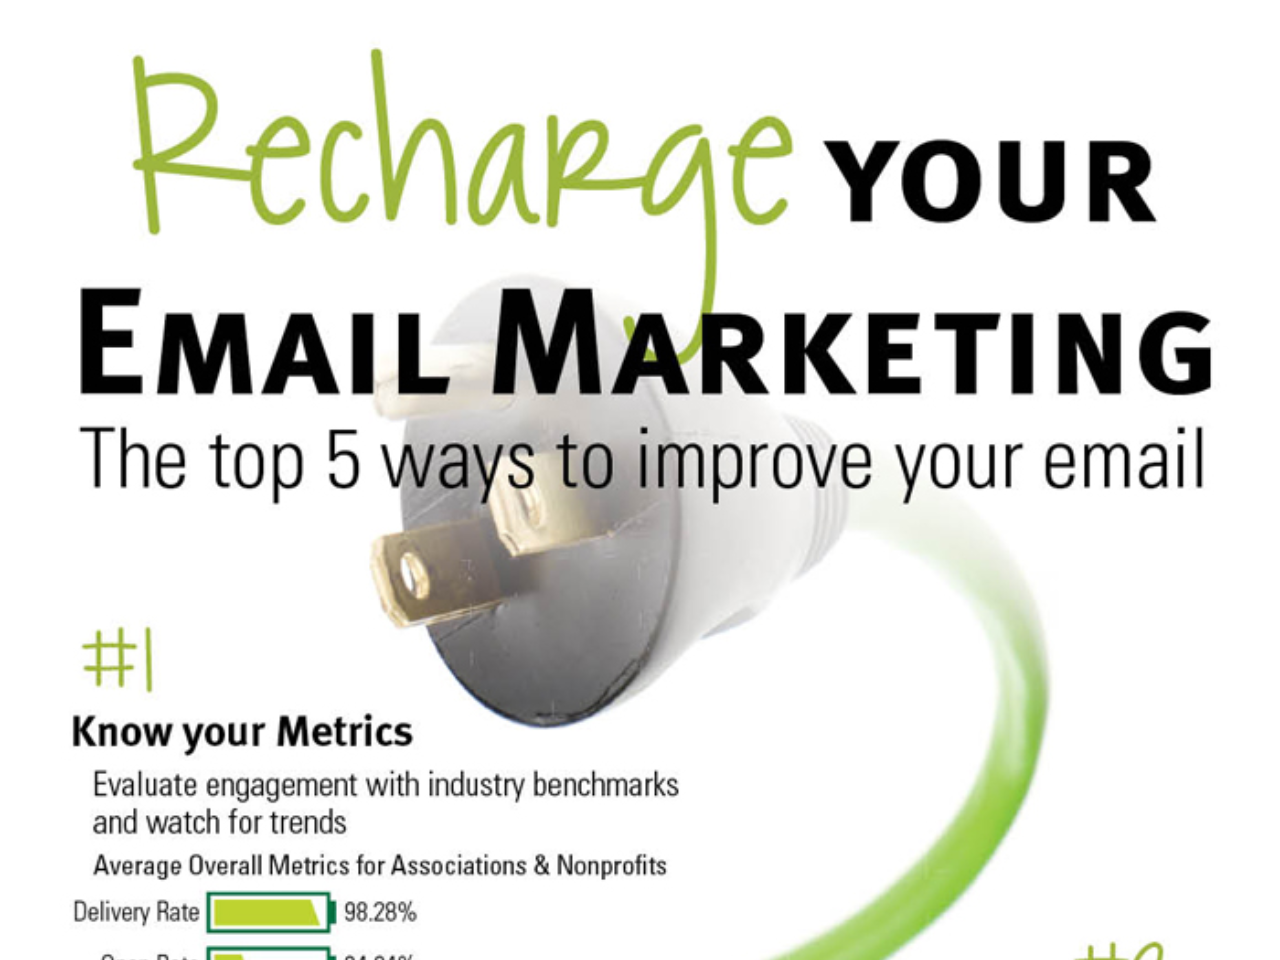 Top 5 Ways To Improve Your Email Marketing [InfoGraphic]